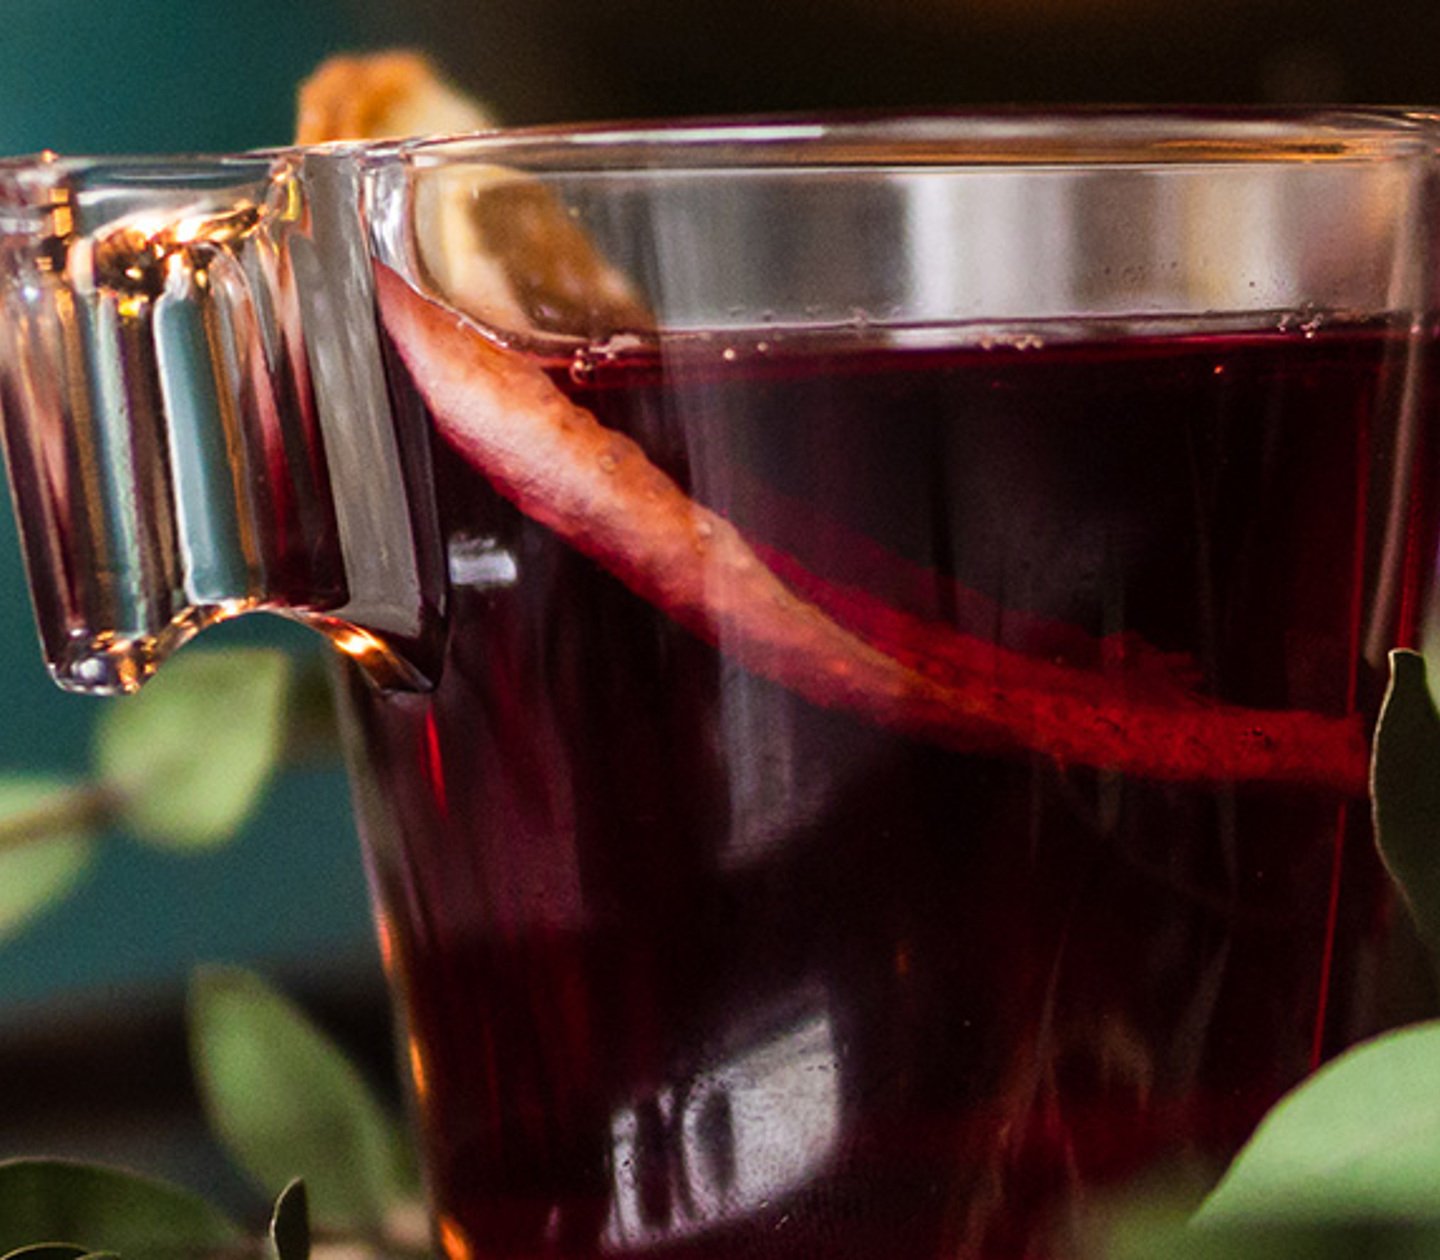 Mulled wine served at Elite Hotels Christmas buffet